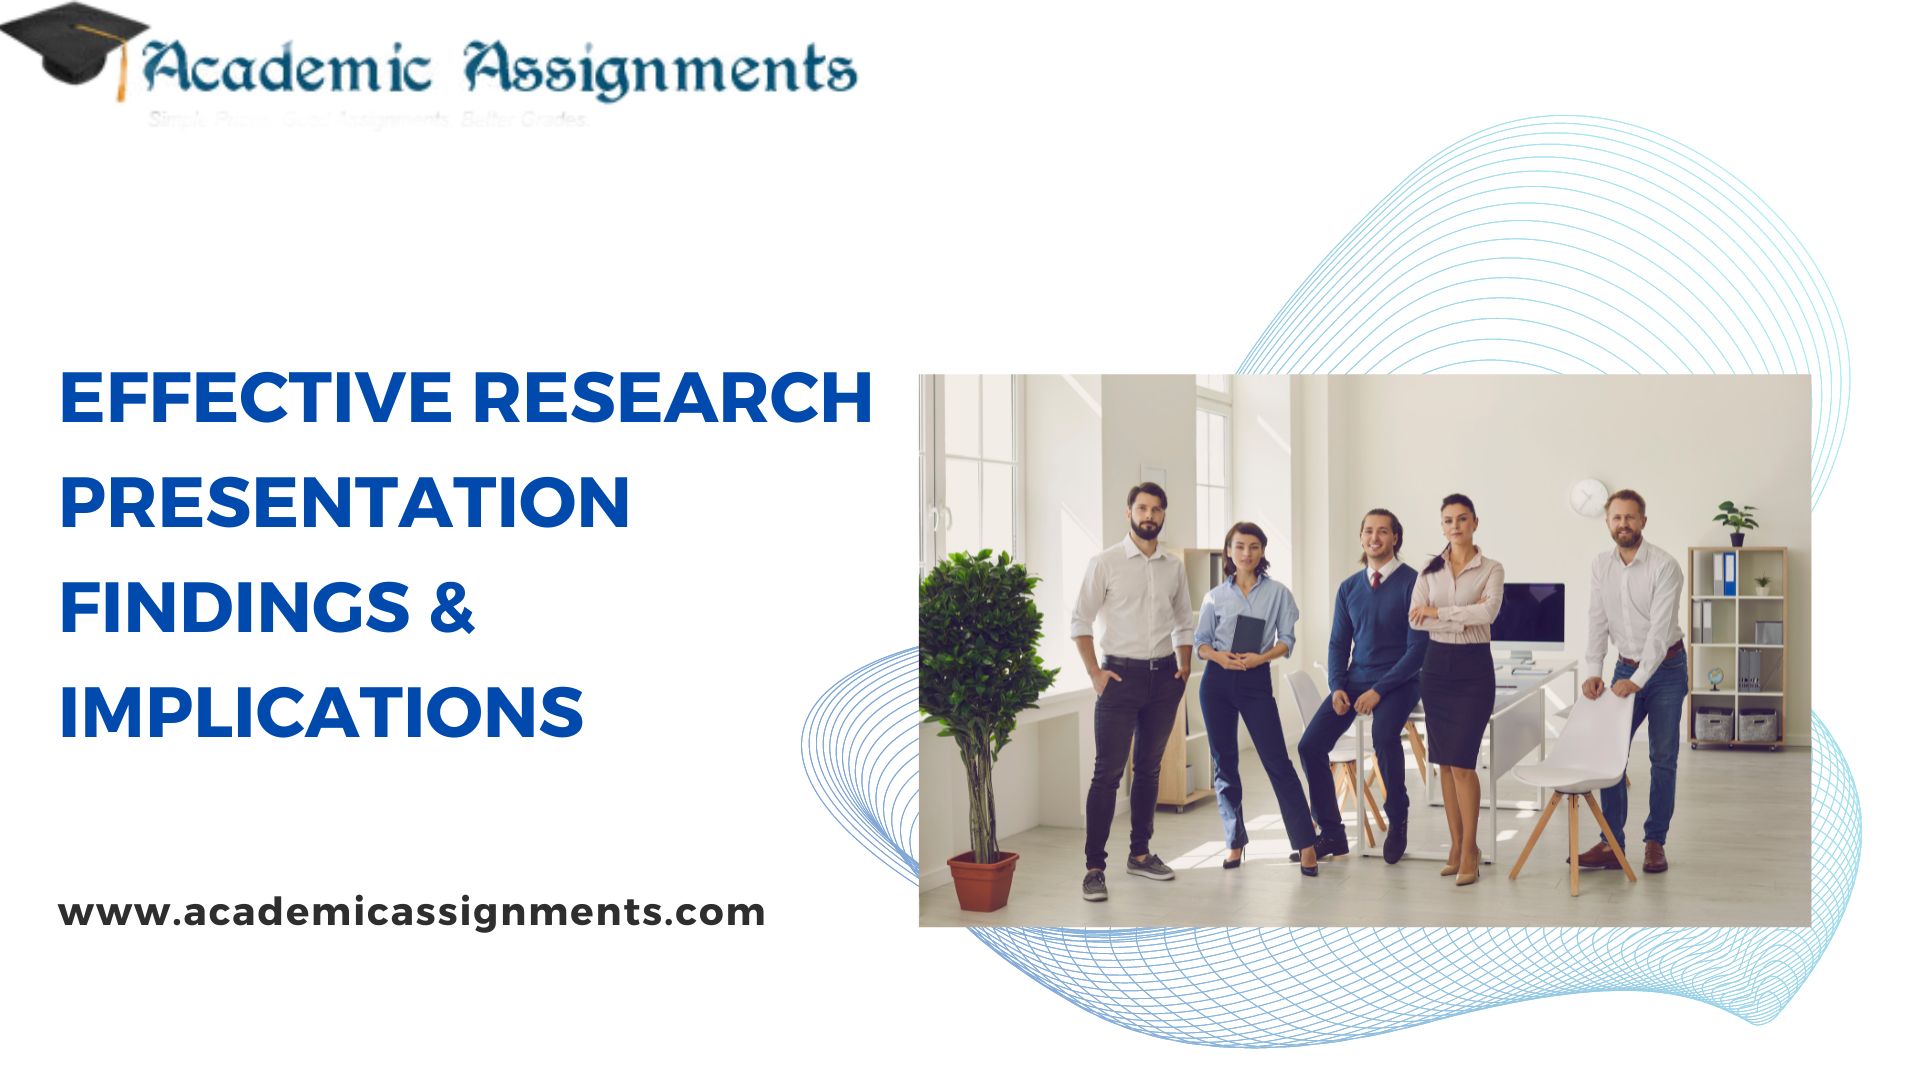 Effective Research Presentation Findings & Implications